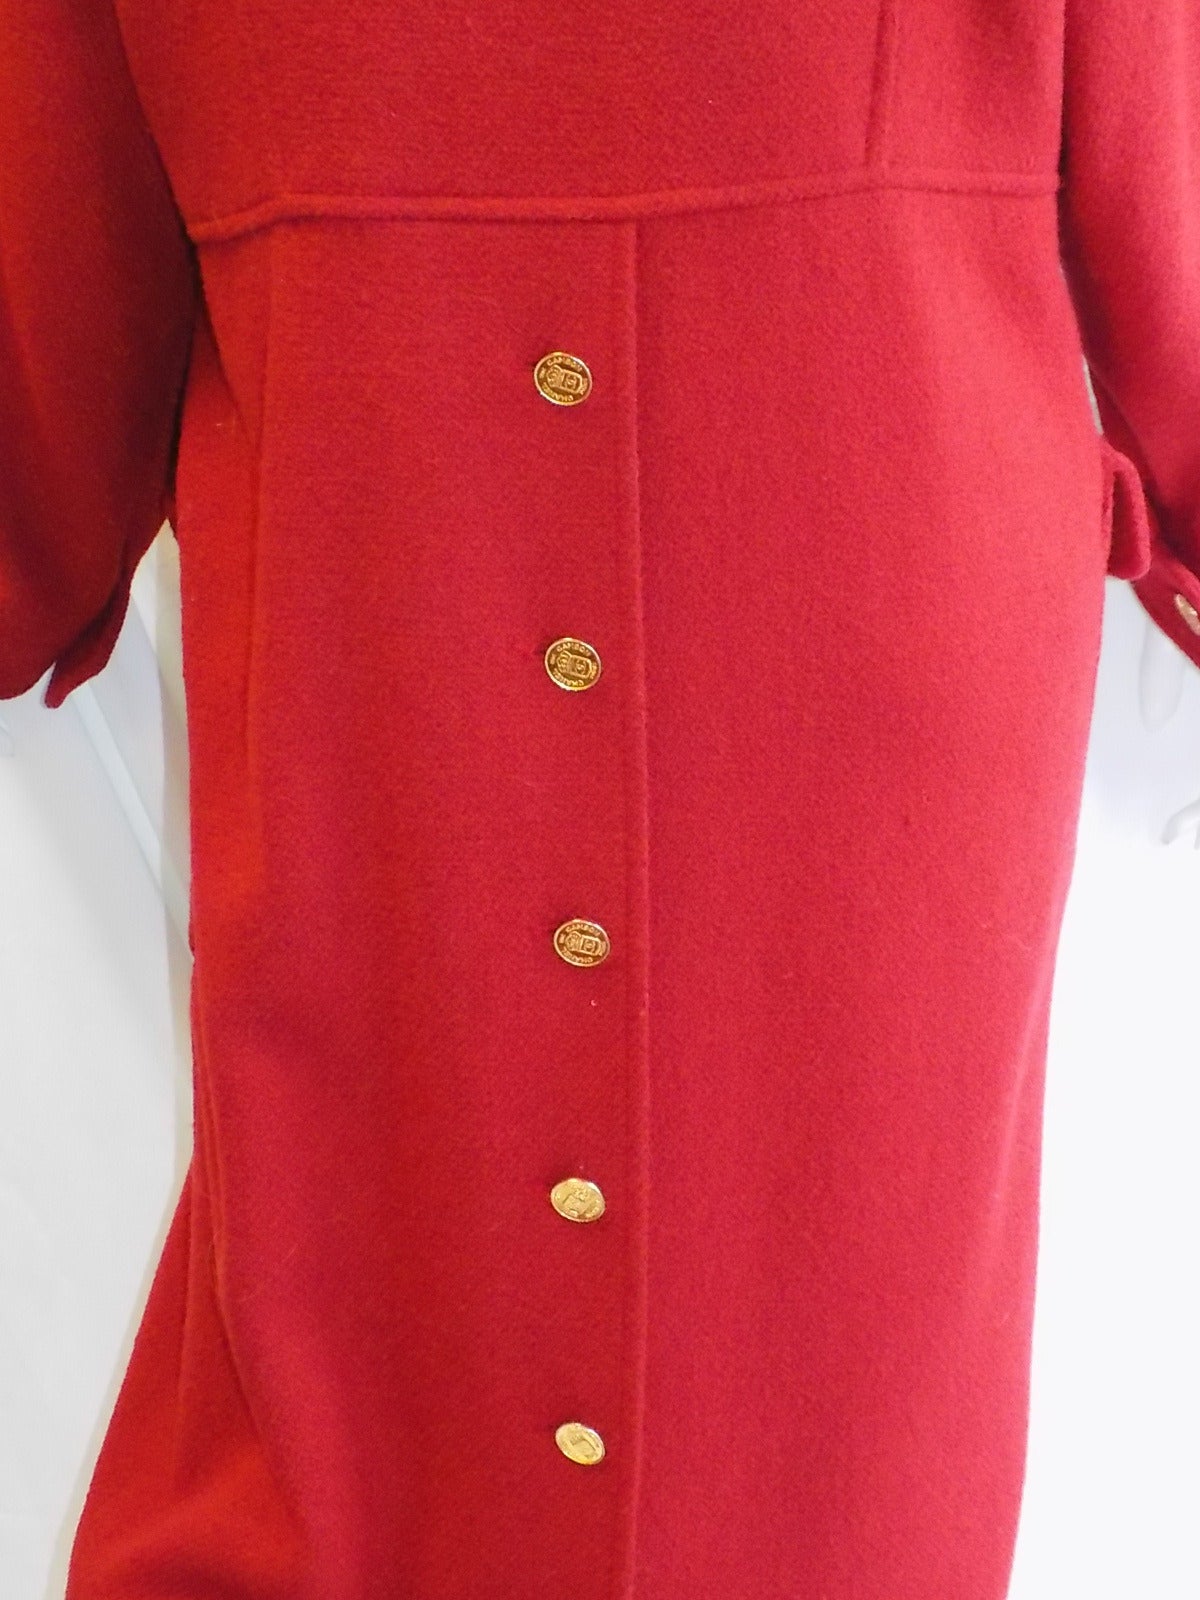 Women's Chanel Vintage Red Coat with large logo buttons